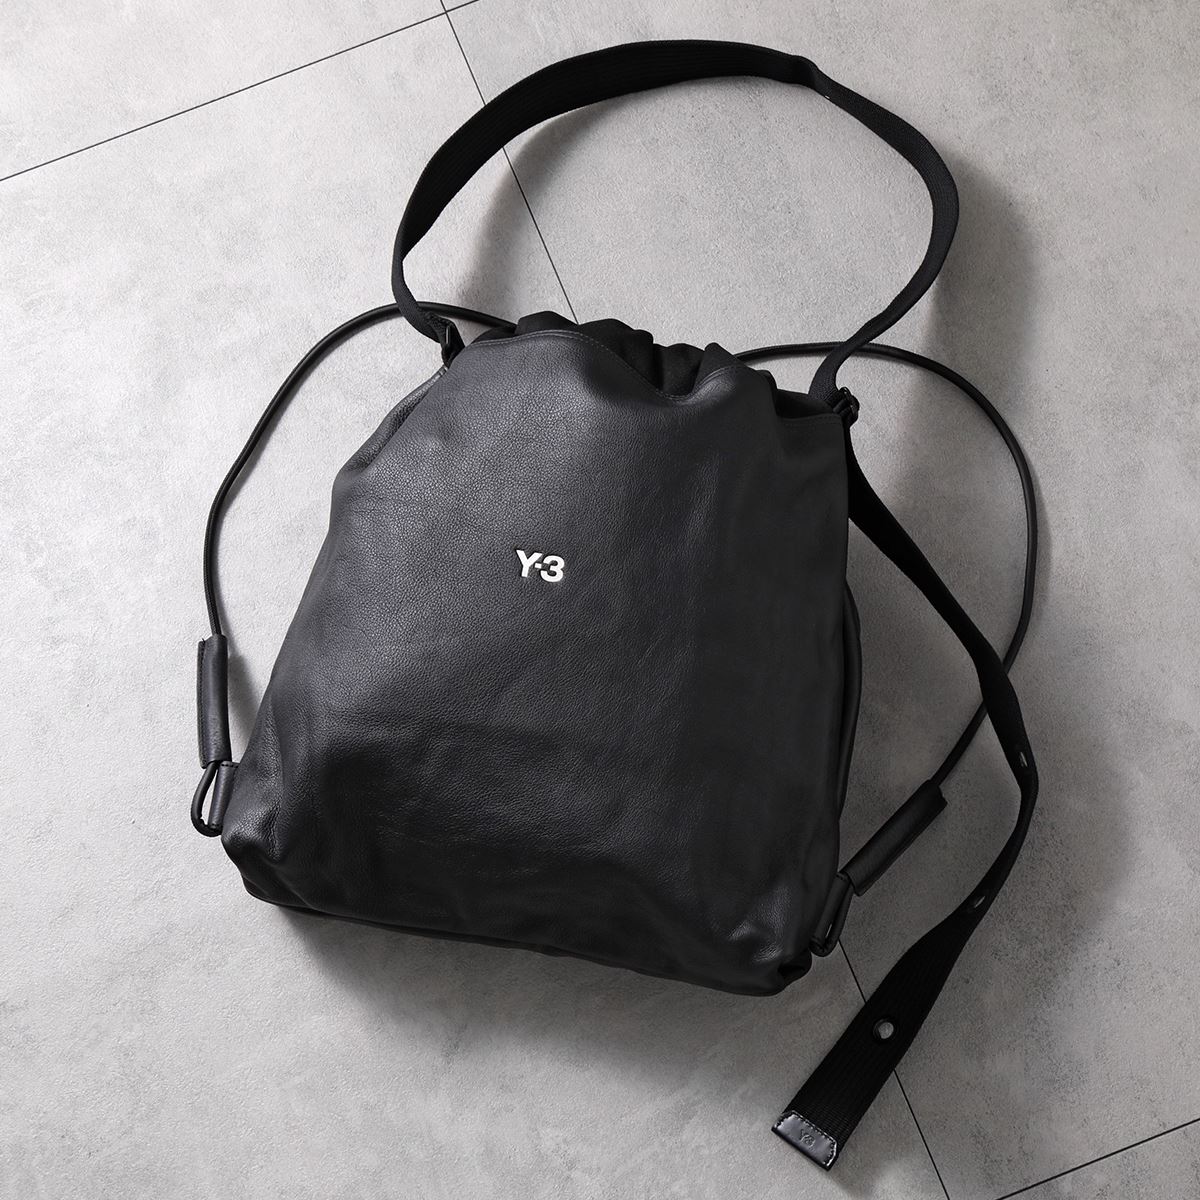 Y-3 ワイスリー トートバッグ LUX GYM BAG ジム バッグ IJ9876 IJ9877 メンズ バックパック レザー ロゴ 鞄 カラー2色｜s-musee｜03